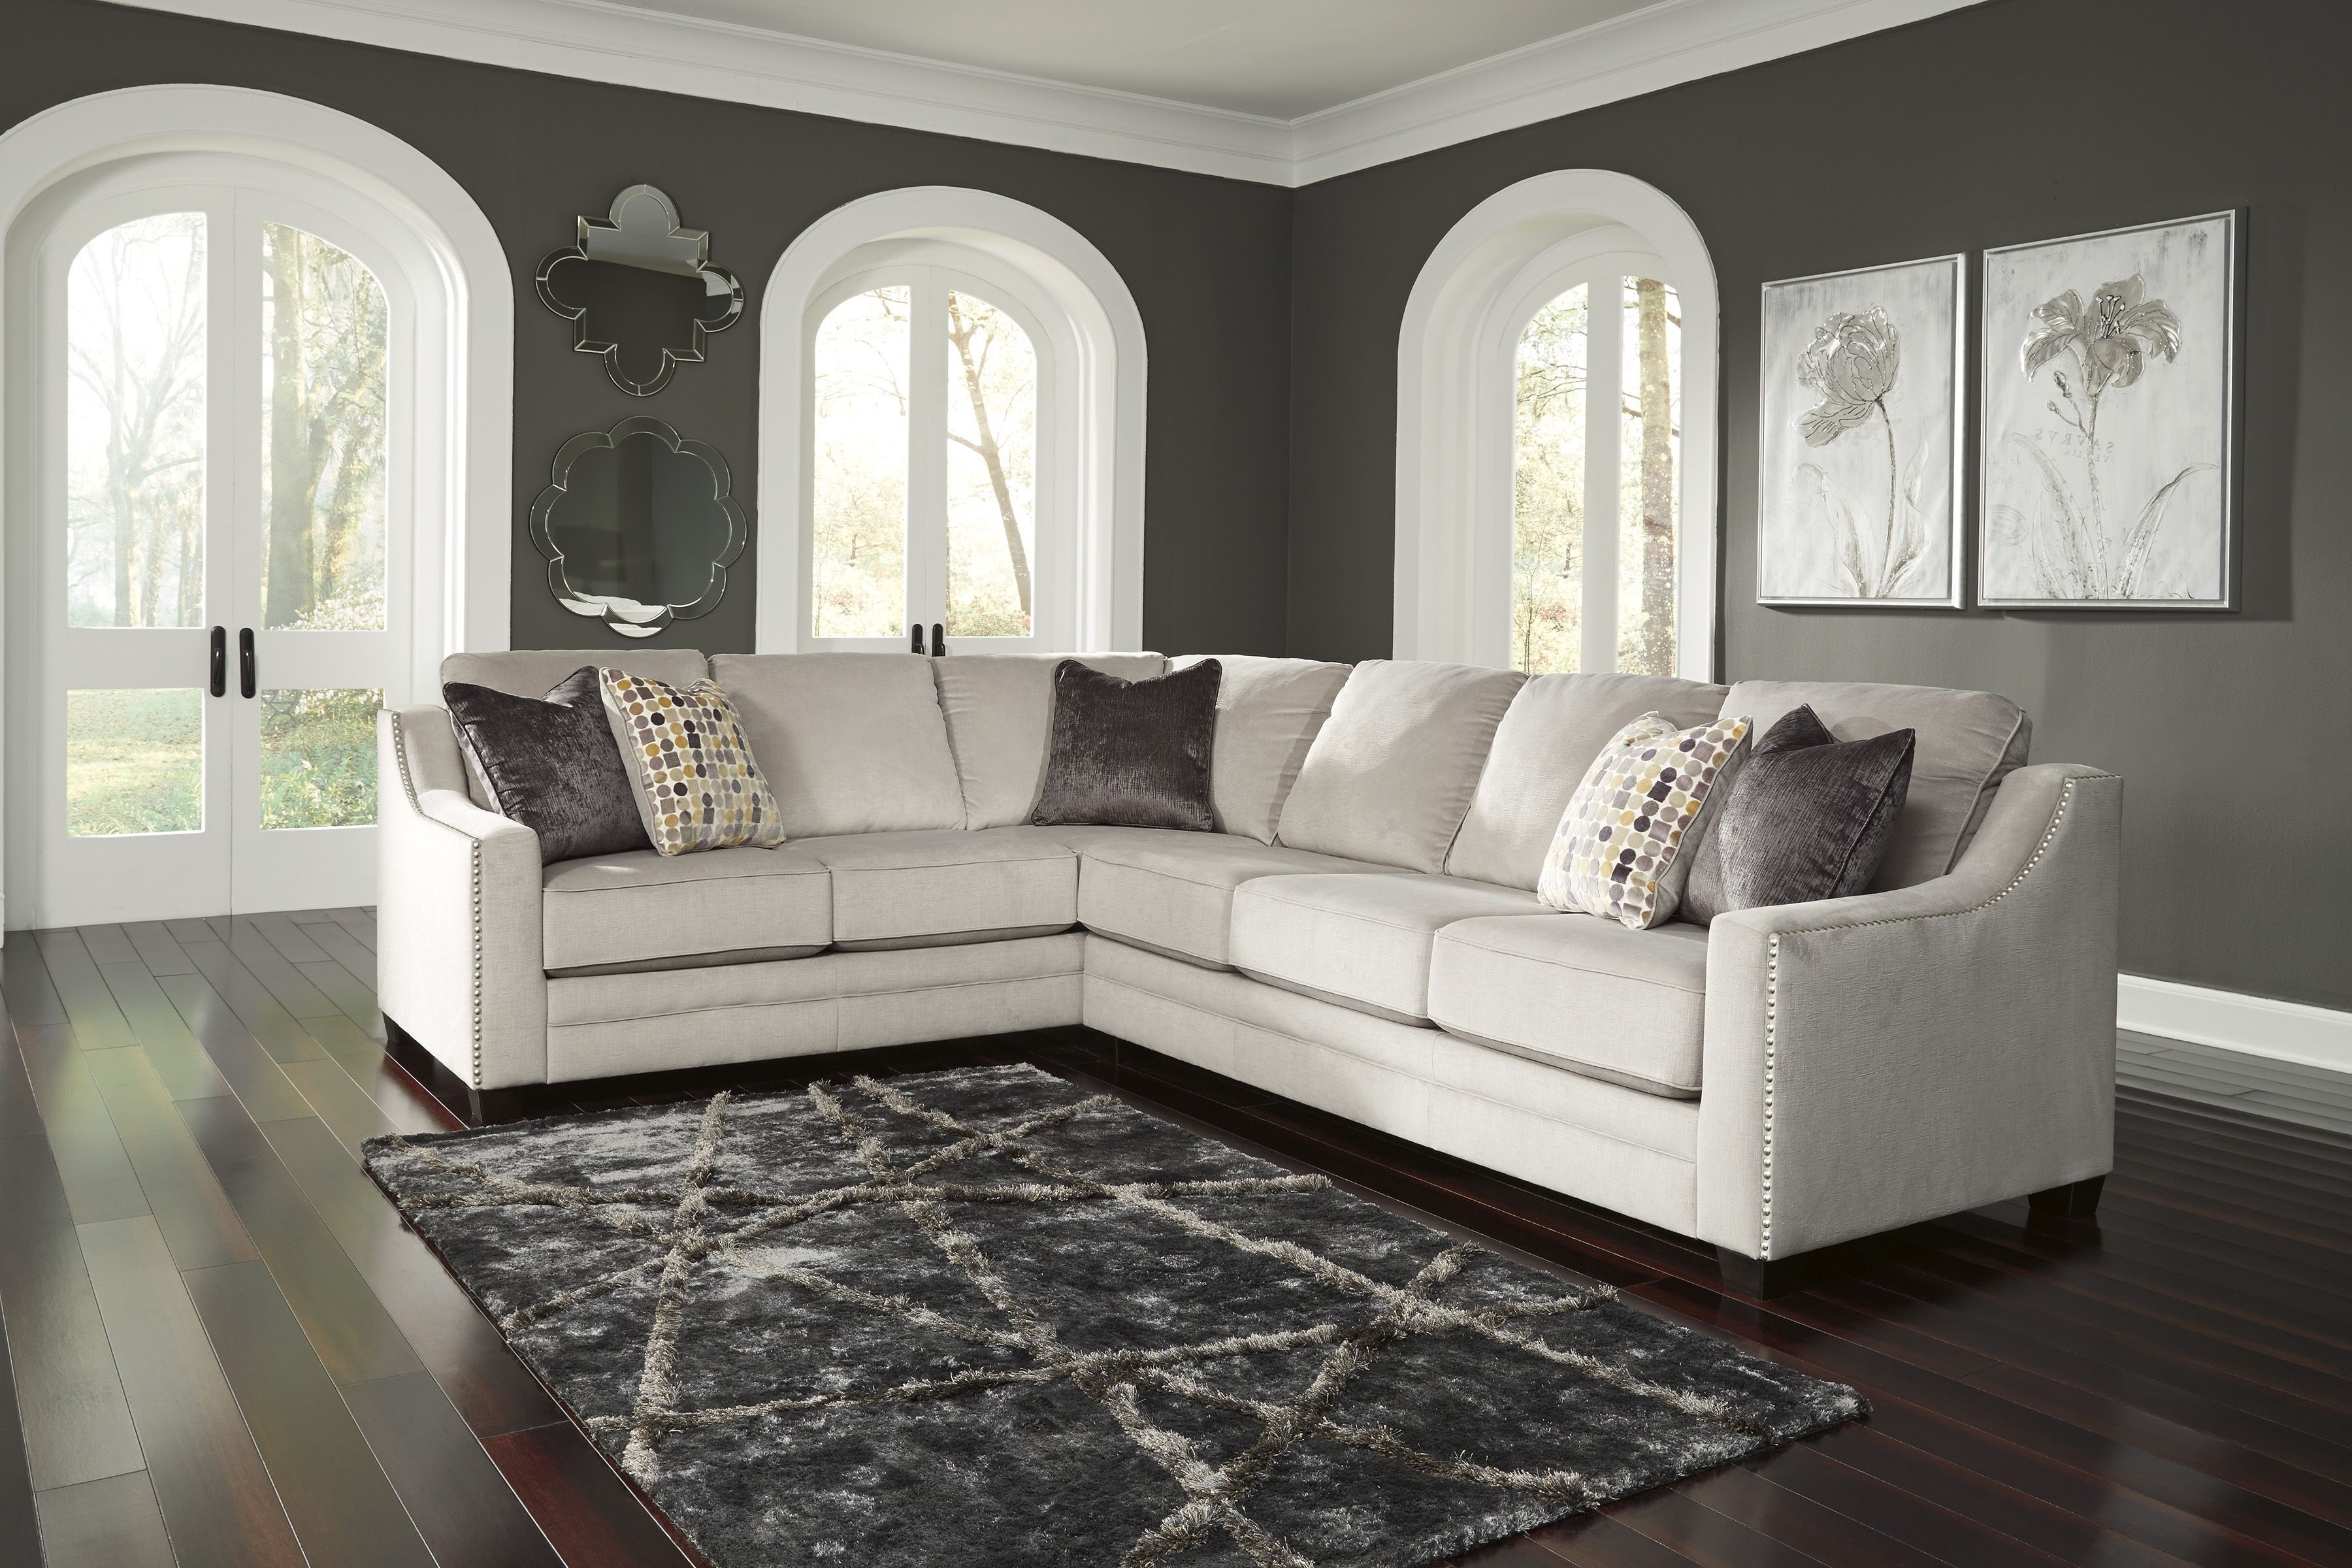 Marigny 2 Piece Raf Sectional | Grand Elegance | Pinterest | Sofa In Marissa Ii 3 Piece Sectionals (View 14 of 30)